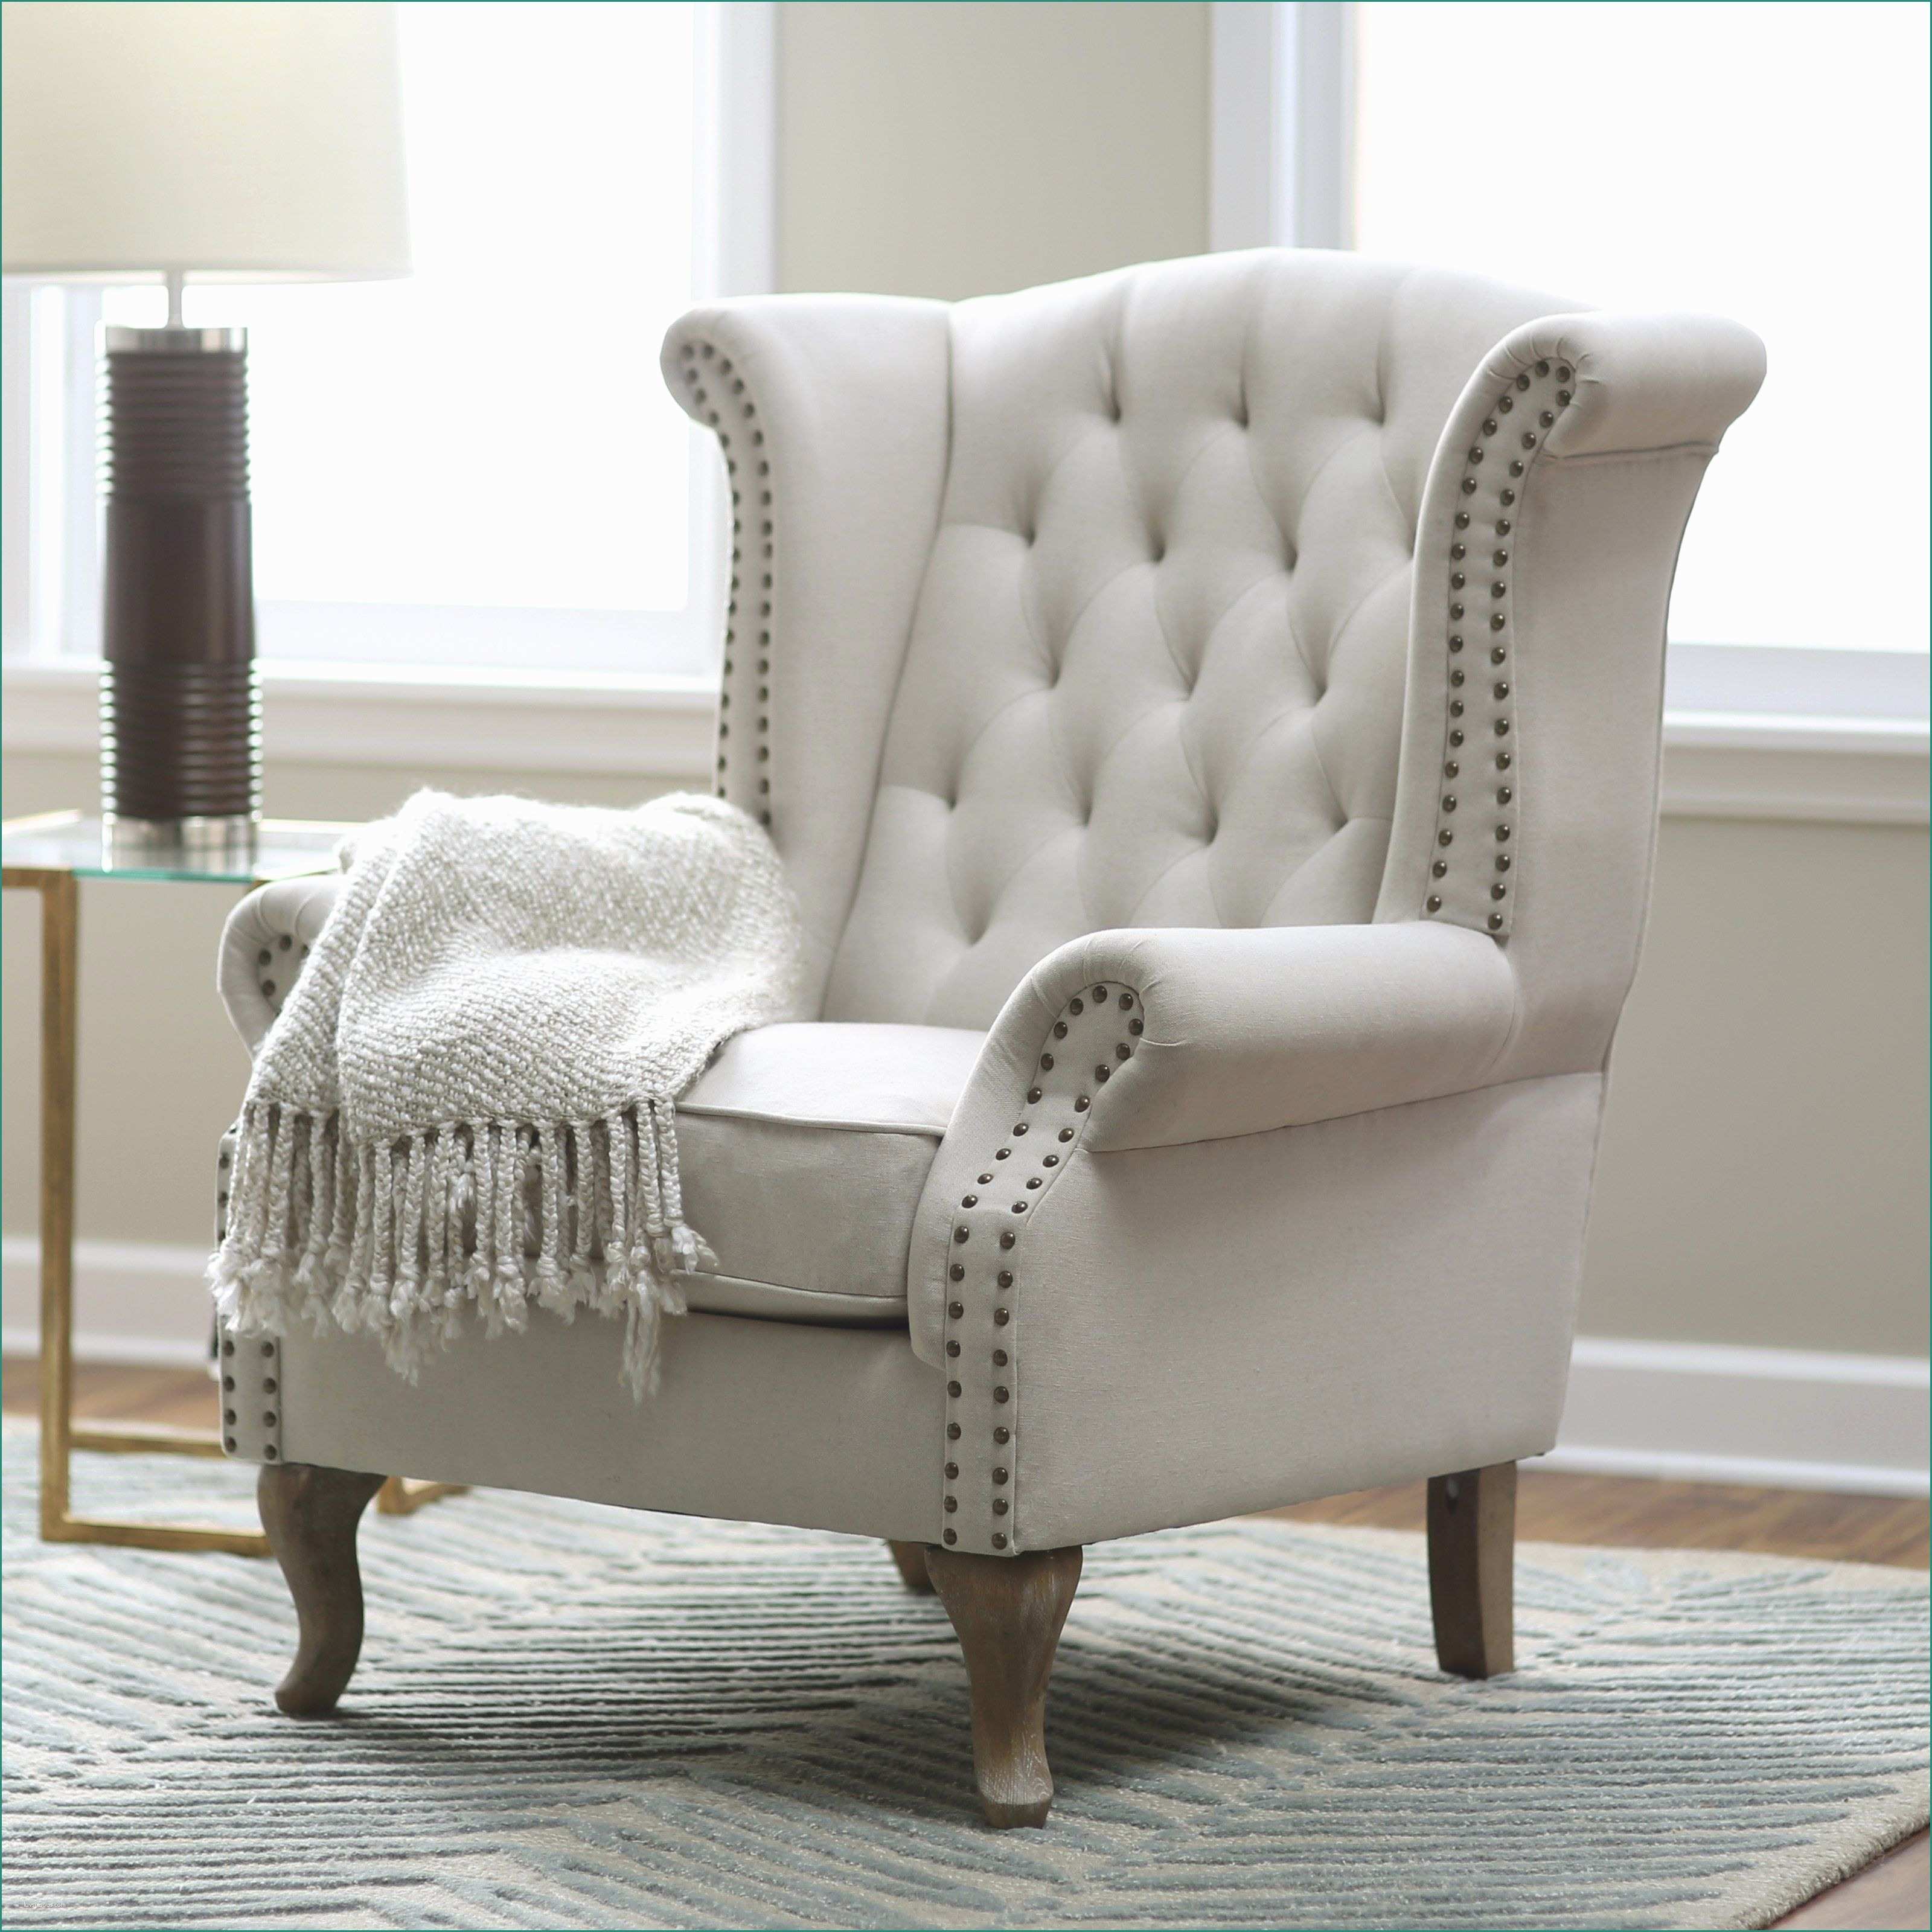 Poltrone Global Relax Prezzi E Belham Living Tatum Tufted Arm Chair with Nailheads Accent